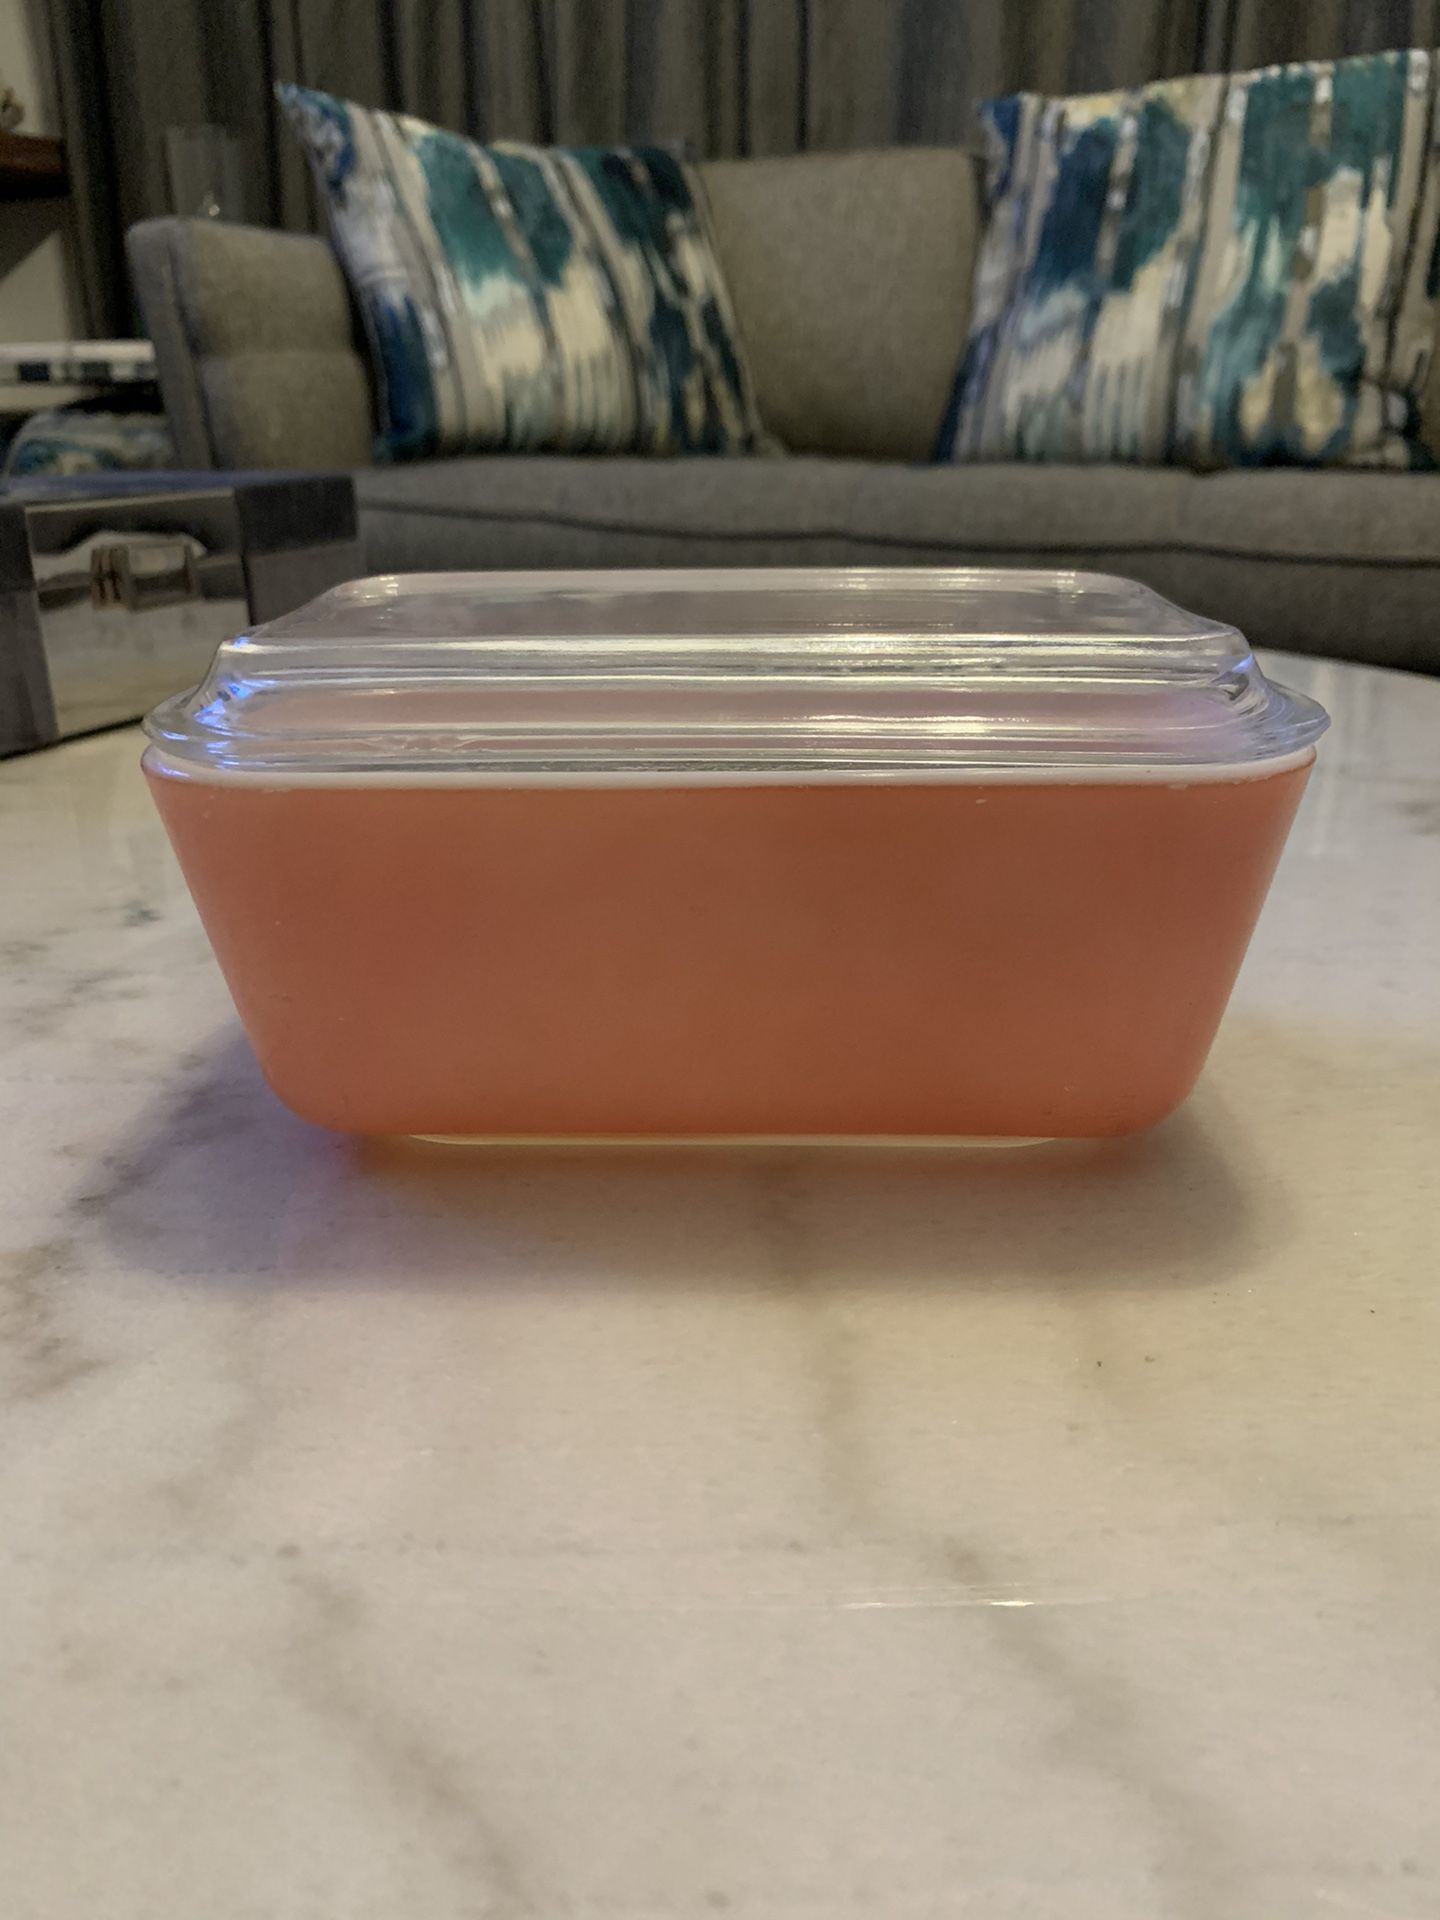 Vintage Pyrex refrigerator dish with lid